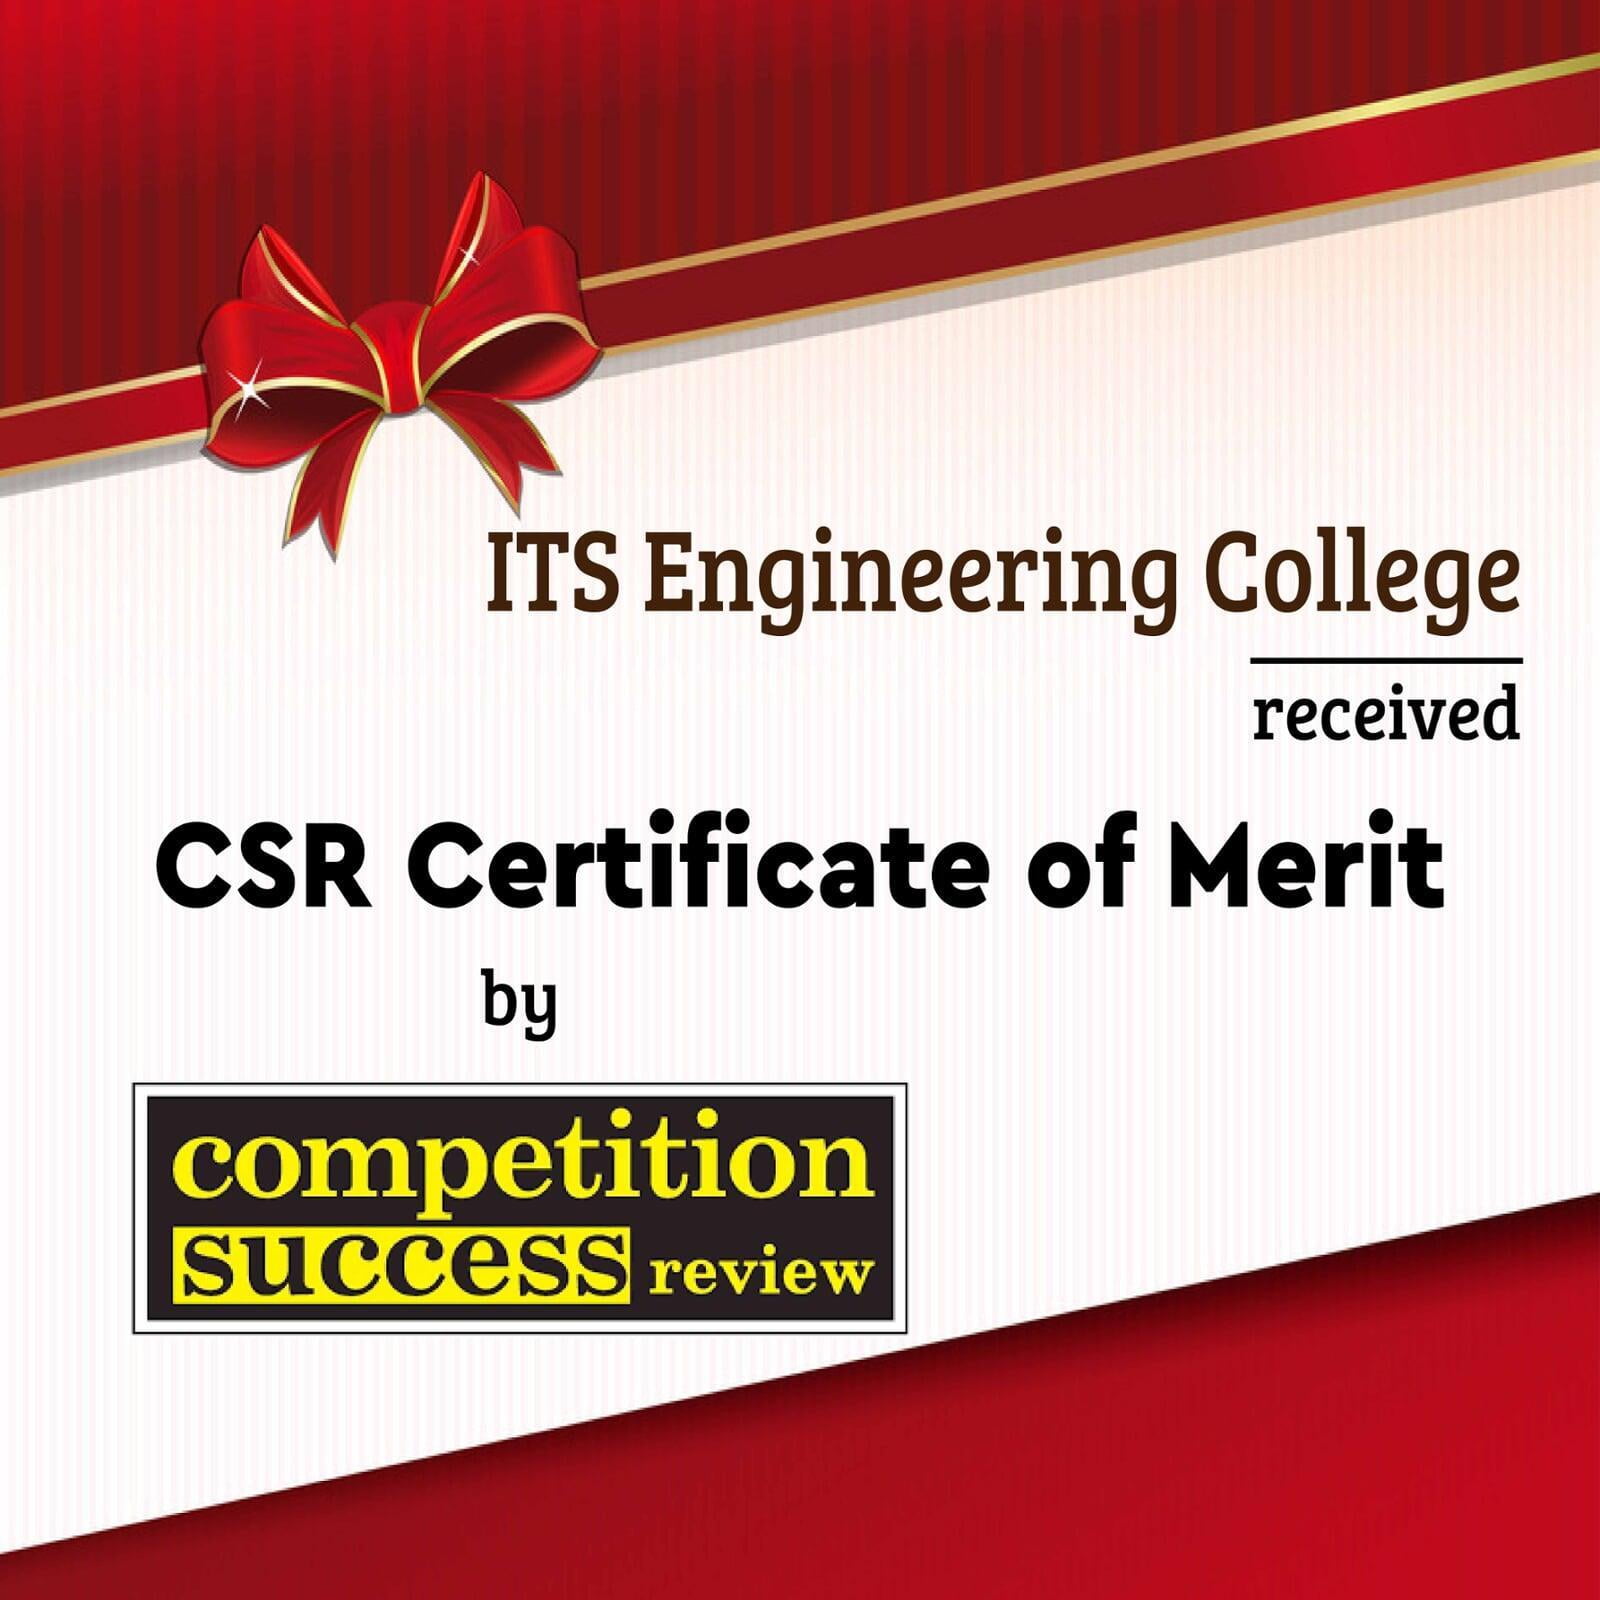 Certificate of Merit by Competition Success Review 2020-21